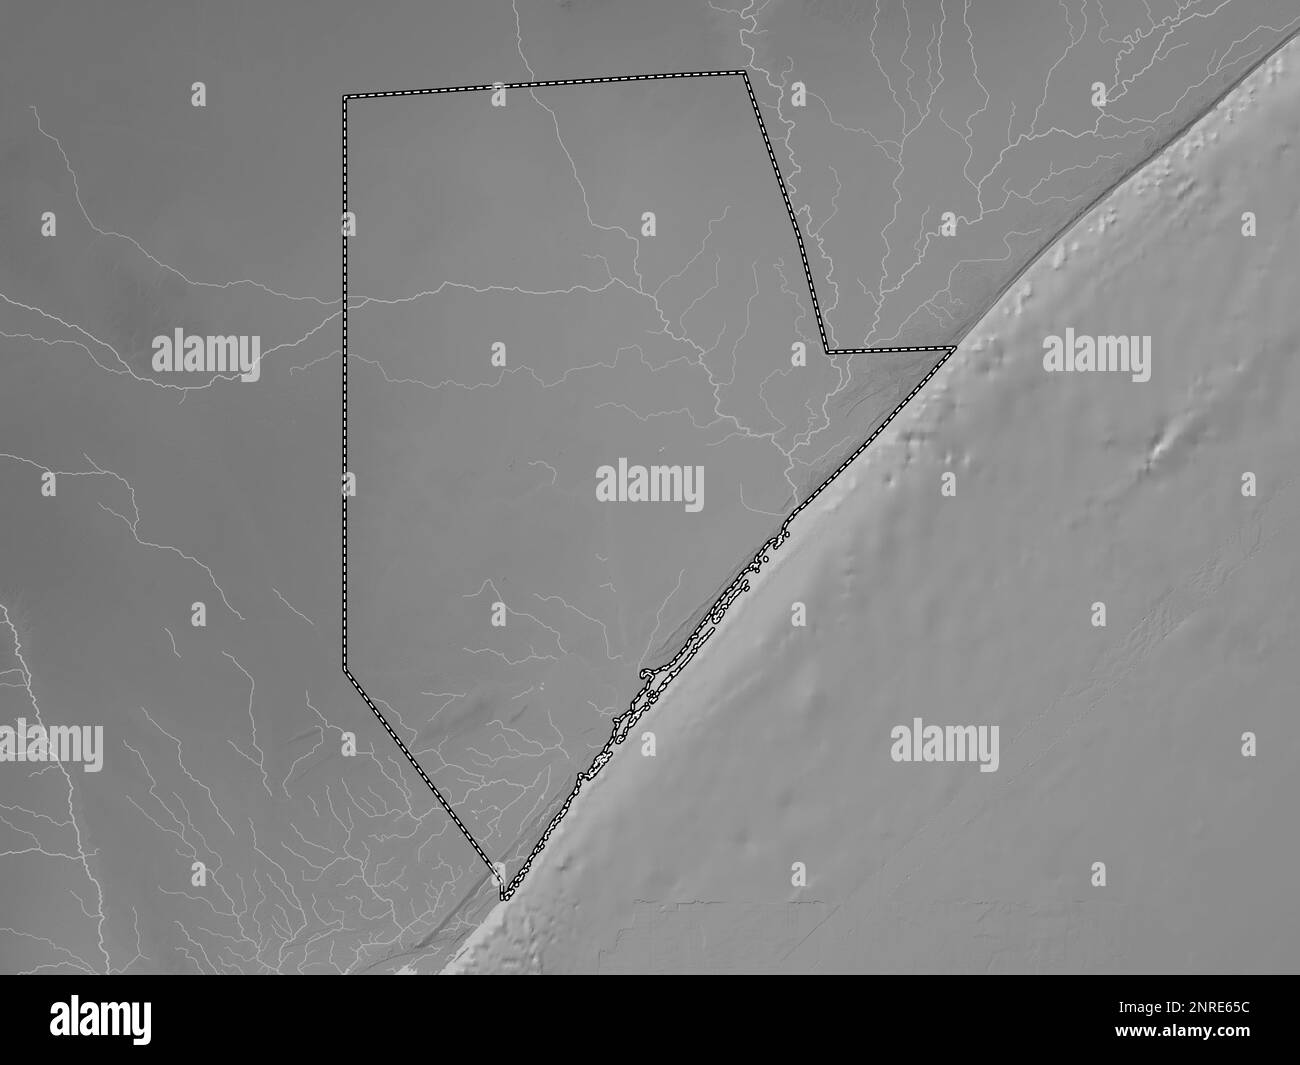 Jubbada Hoose, region of Somalia Mainland. Grayscale elevation map with lakes and rivers Stock Photo